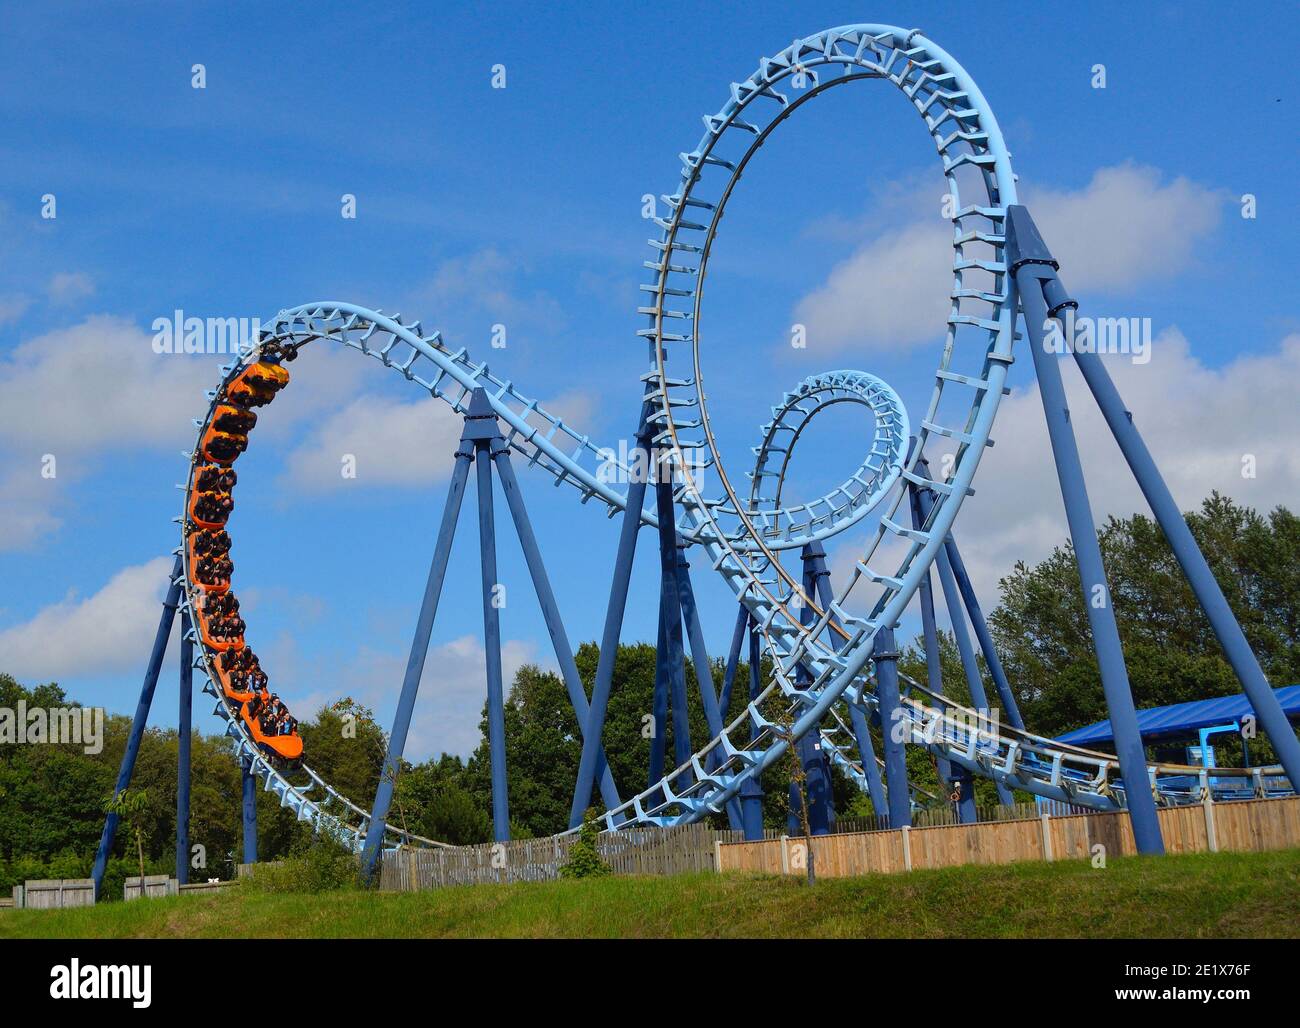 Roller coaster  ride filled  with thrill seekers Stock Photo